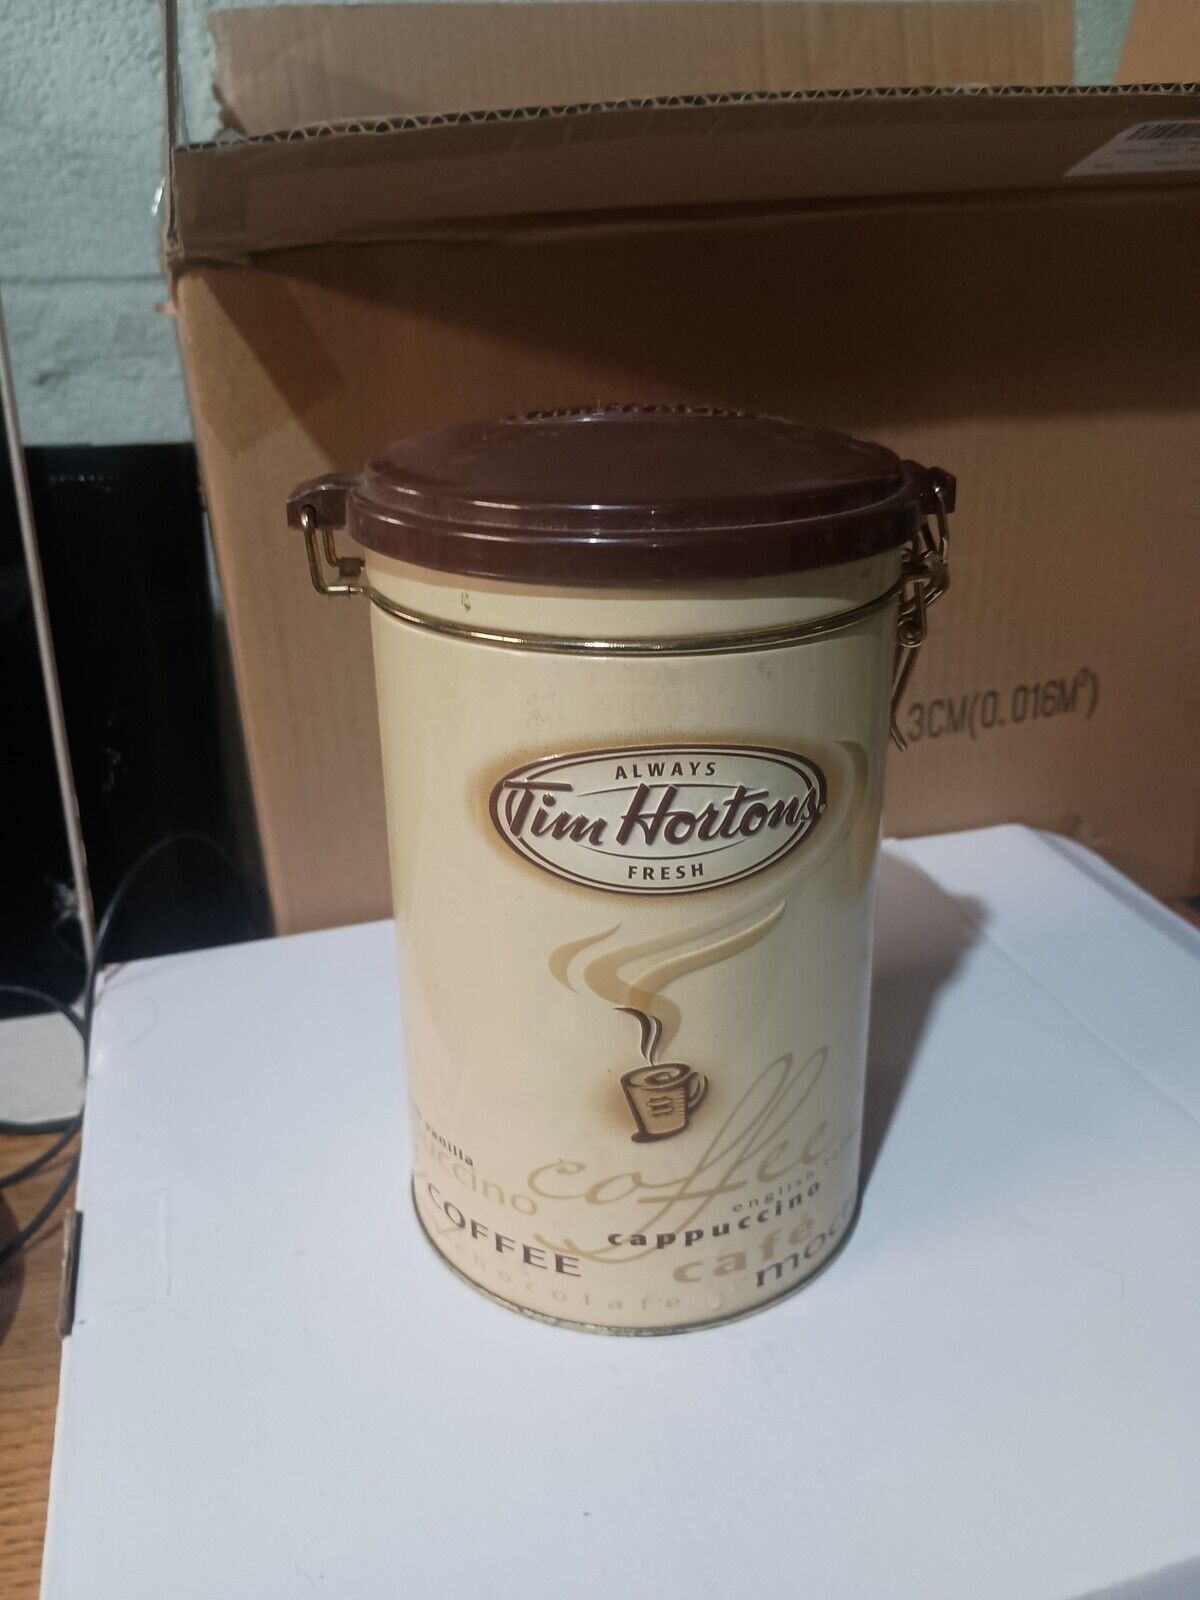 New Tim Horton's Tin Coffee Metal Canister Limited Edition #006 Always Fresh